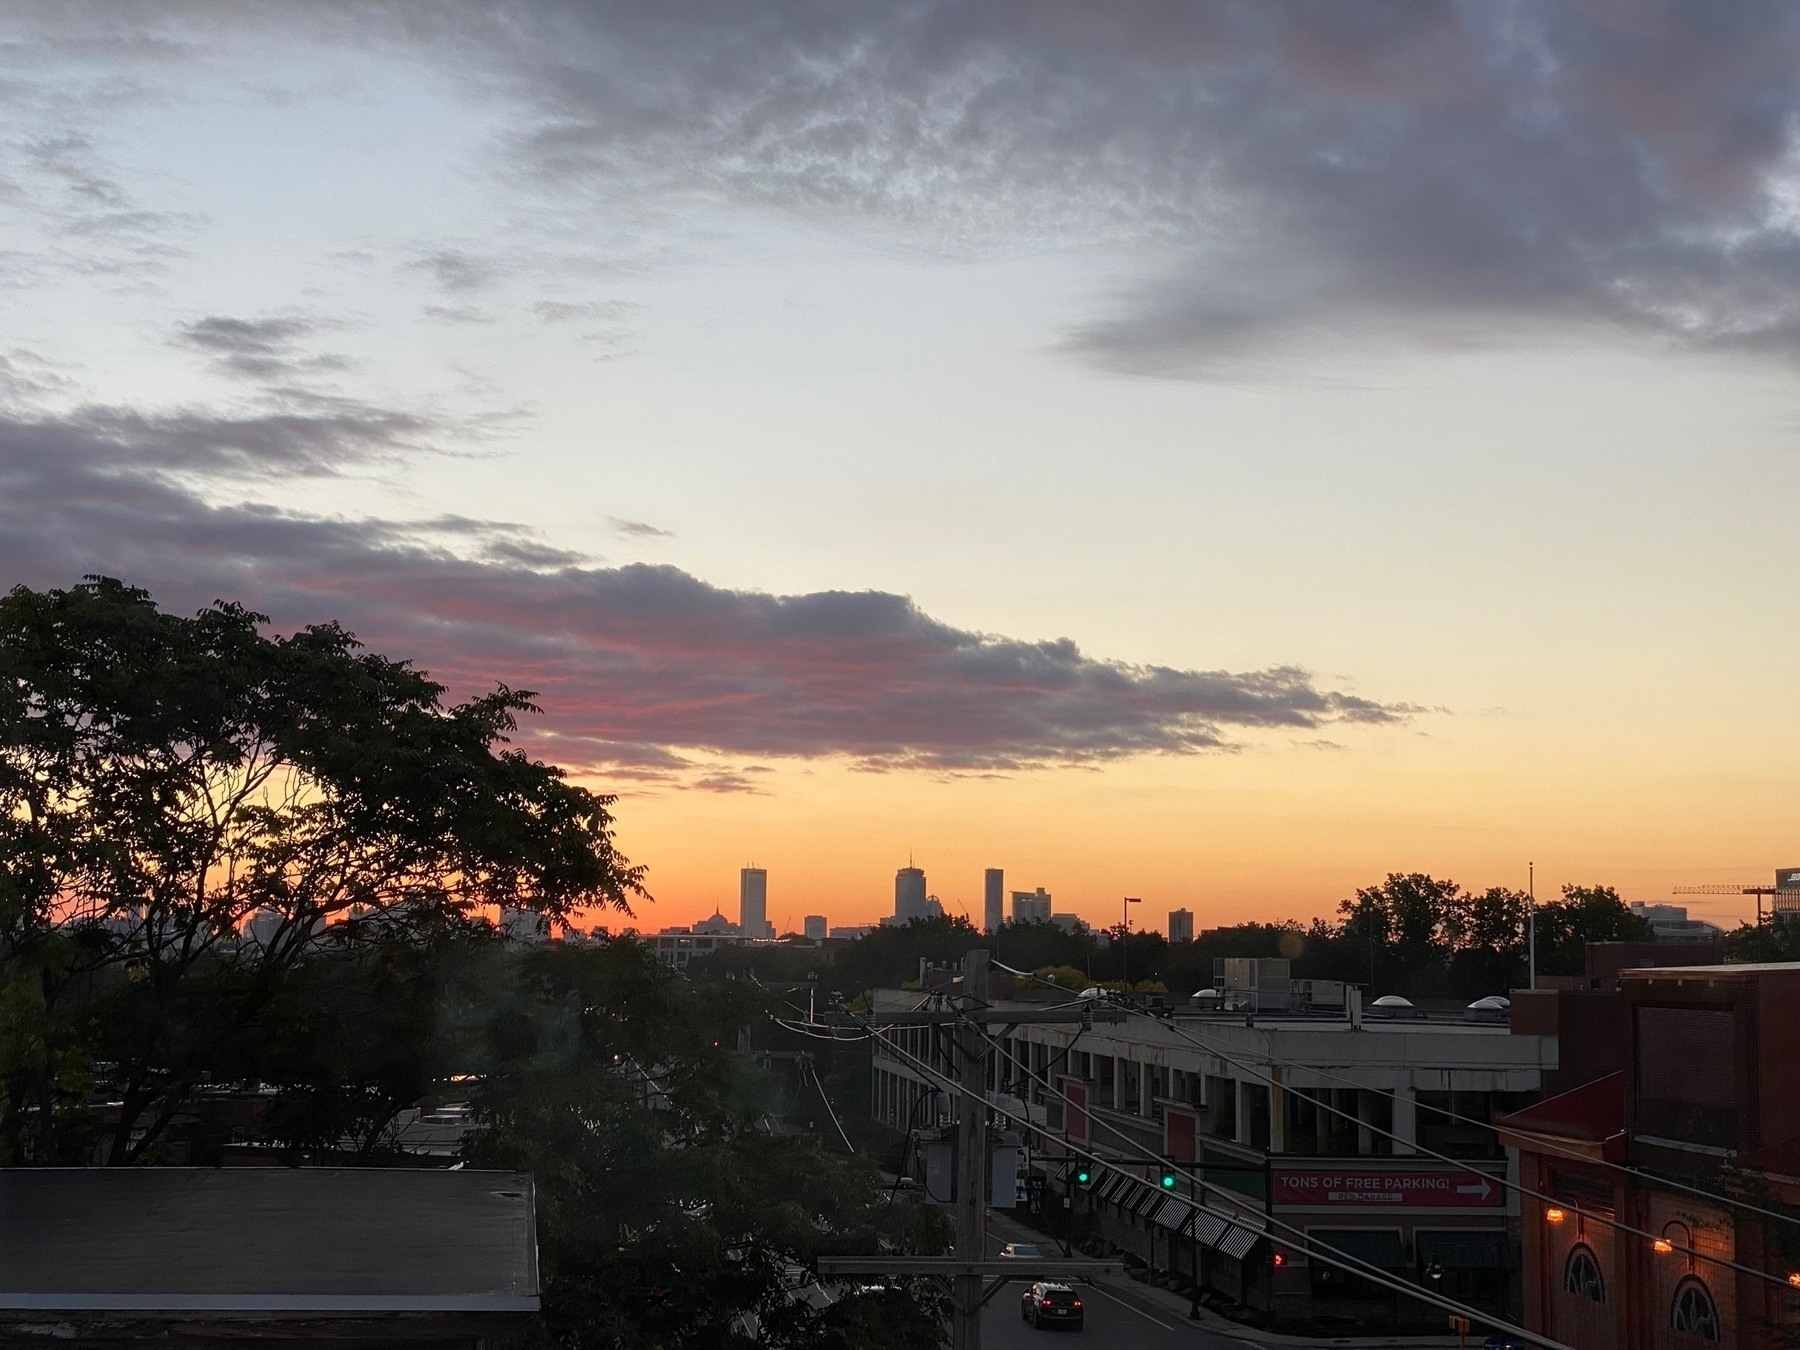 Sunset view of the Boston skyline with a dark street below.